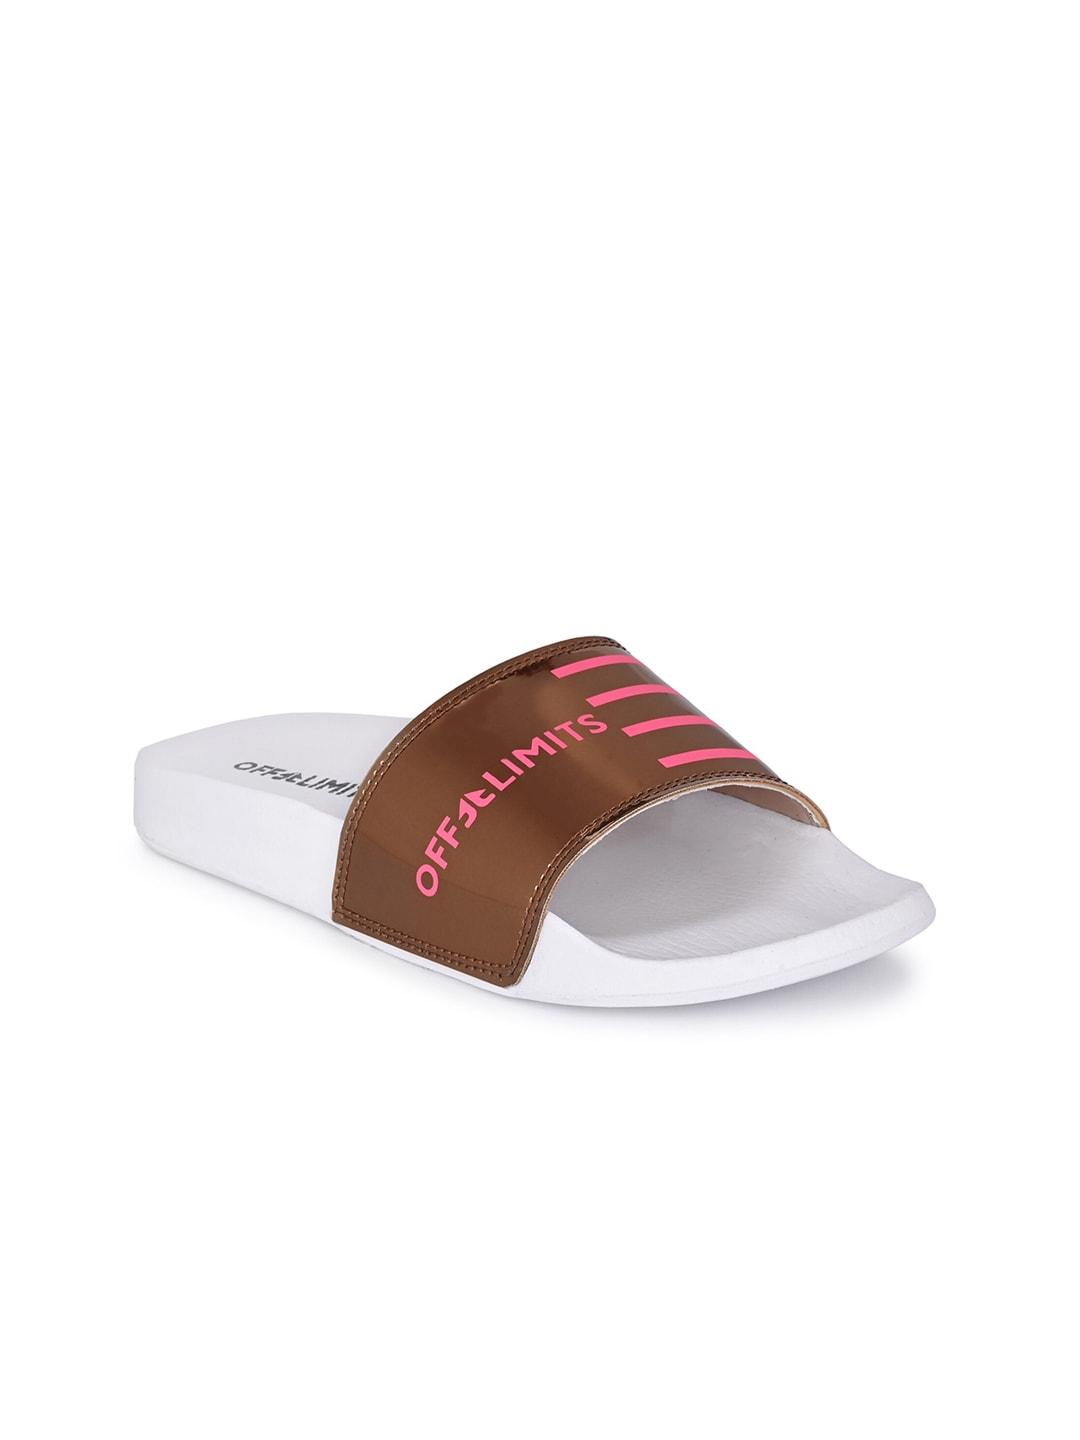 off-limits-women-copper-toned-&-pink-printed-sliders